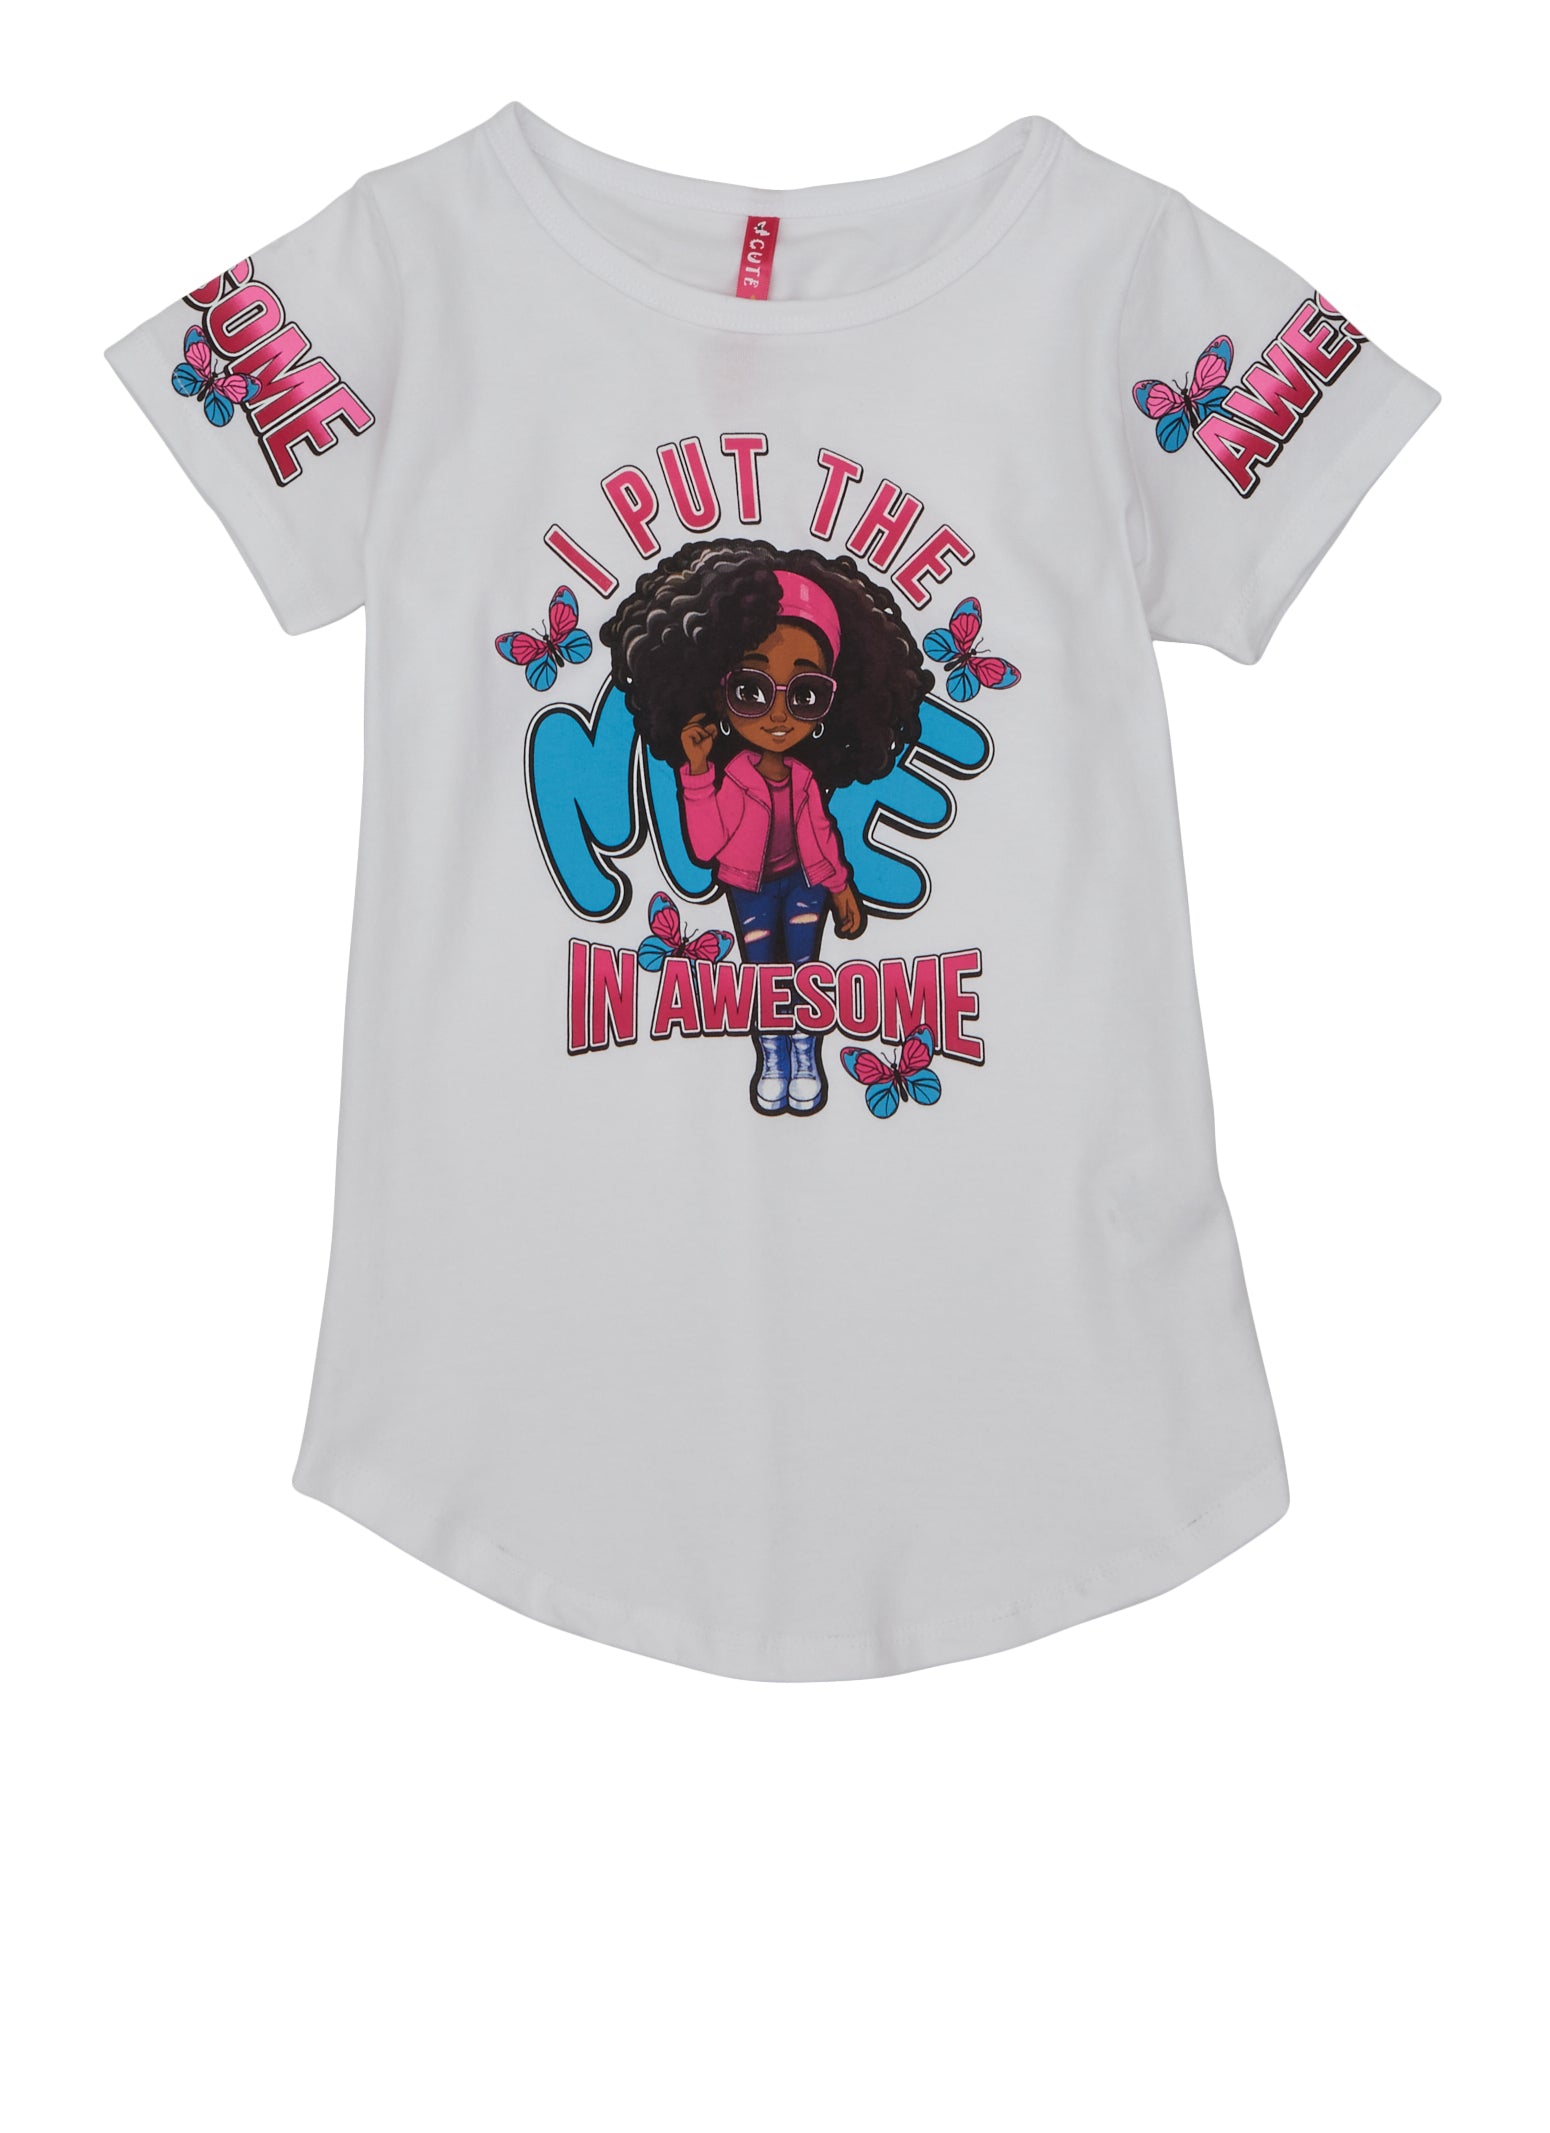 Little Girls Me In Awesome Graphic T Shirt, White, Size 5-6